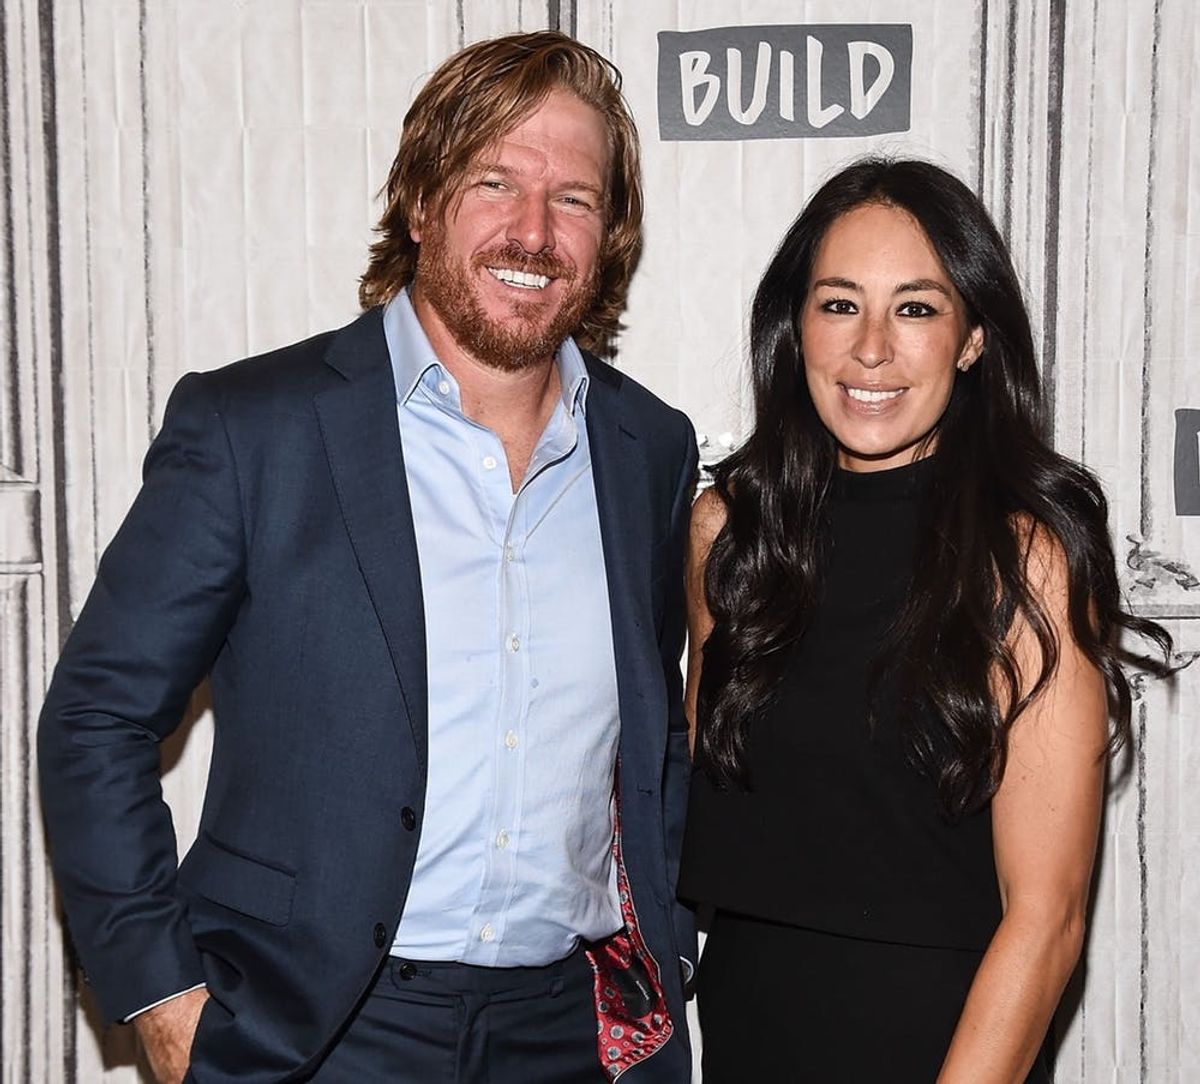 Chip and Joanna Gaines Already Have a New HGTV Series in the Works